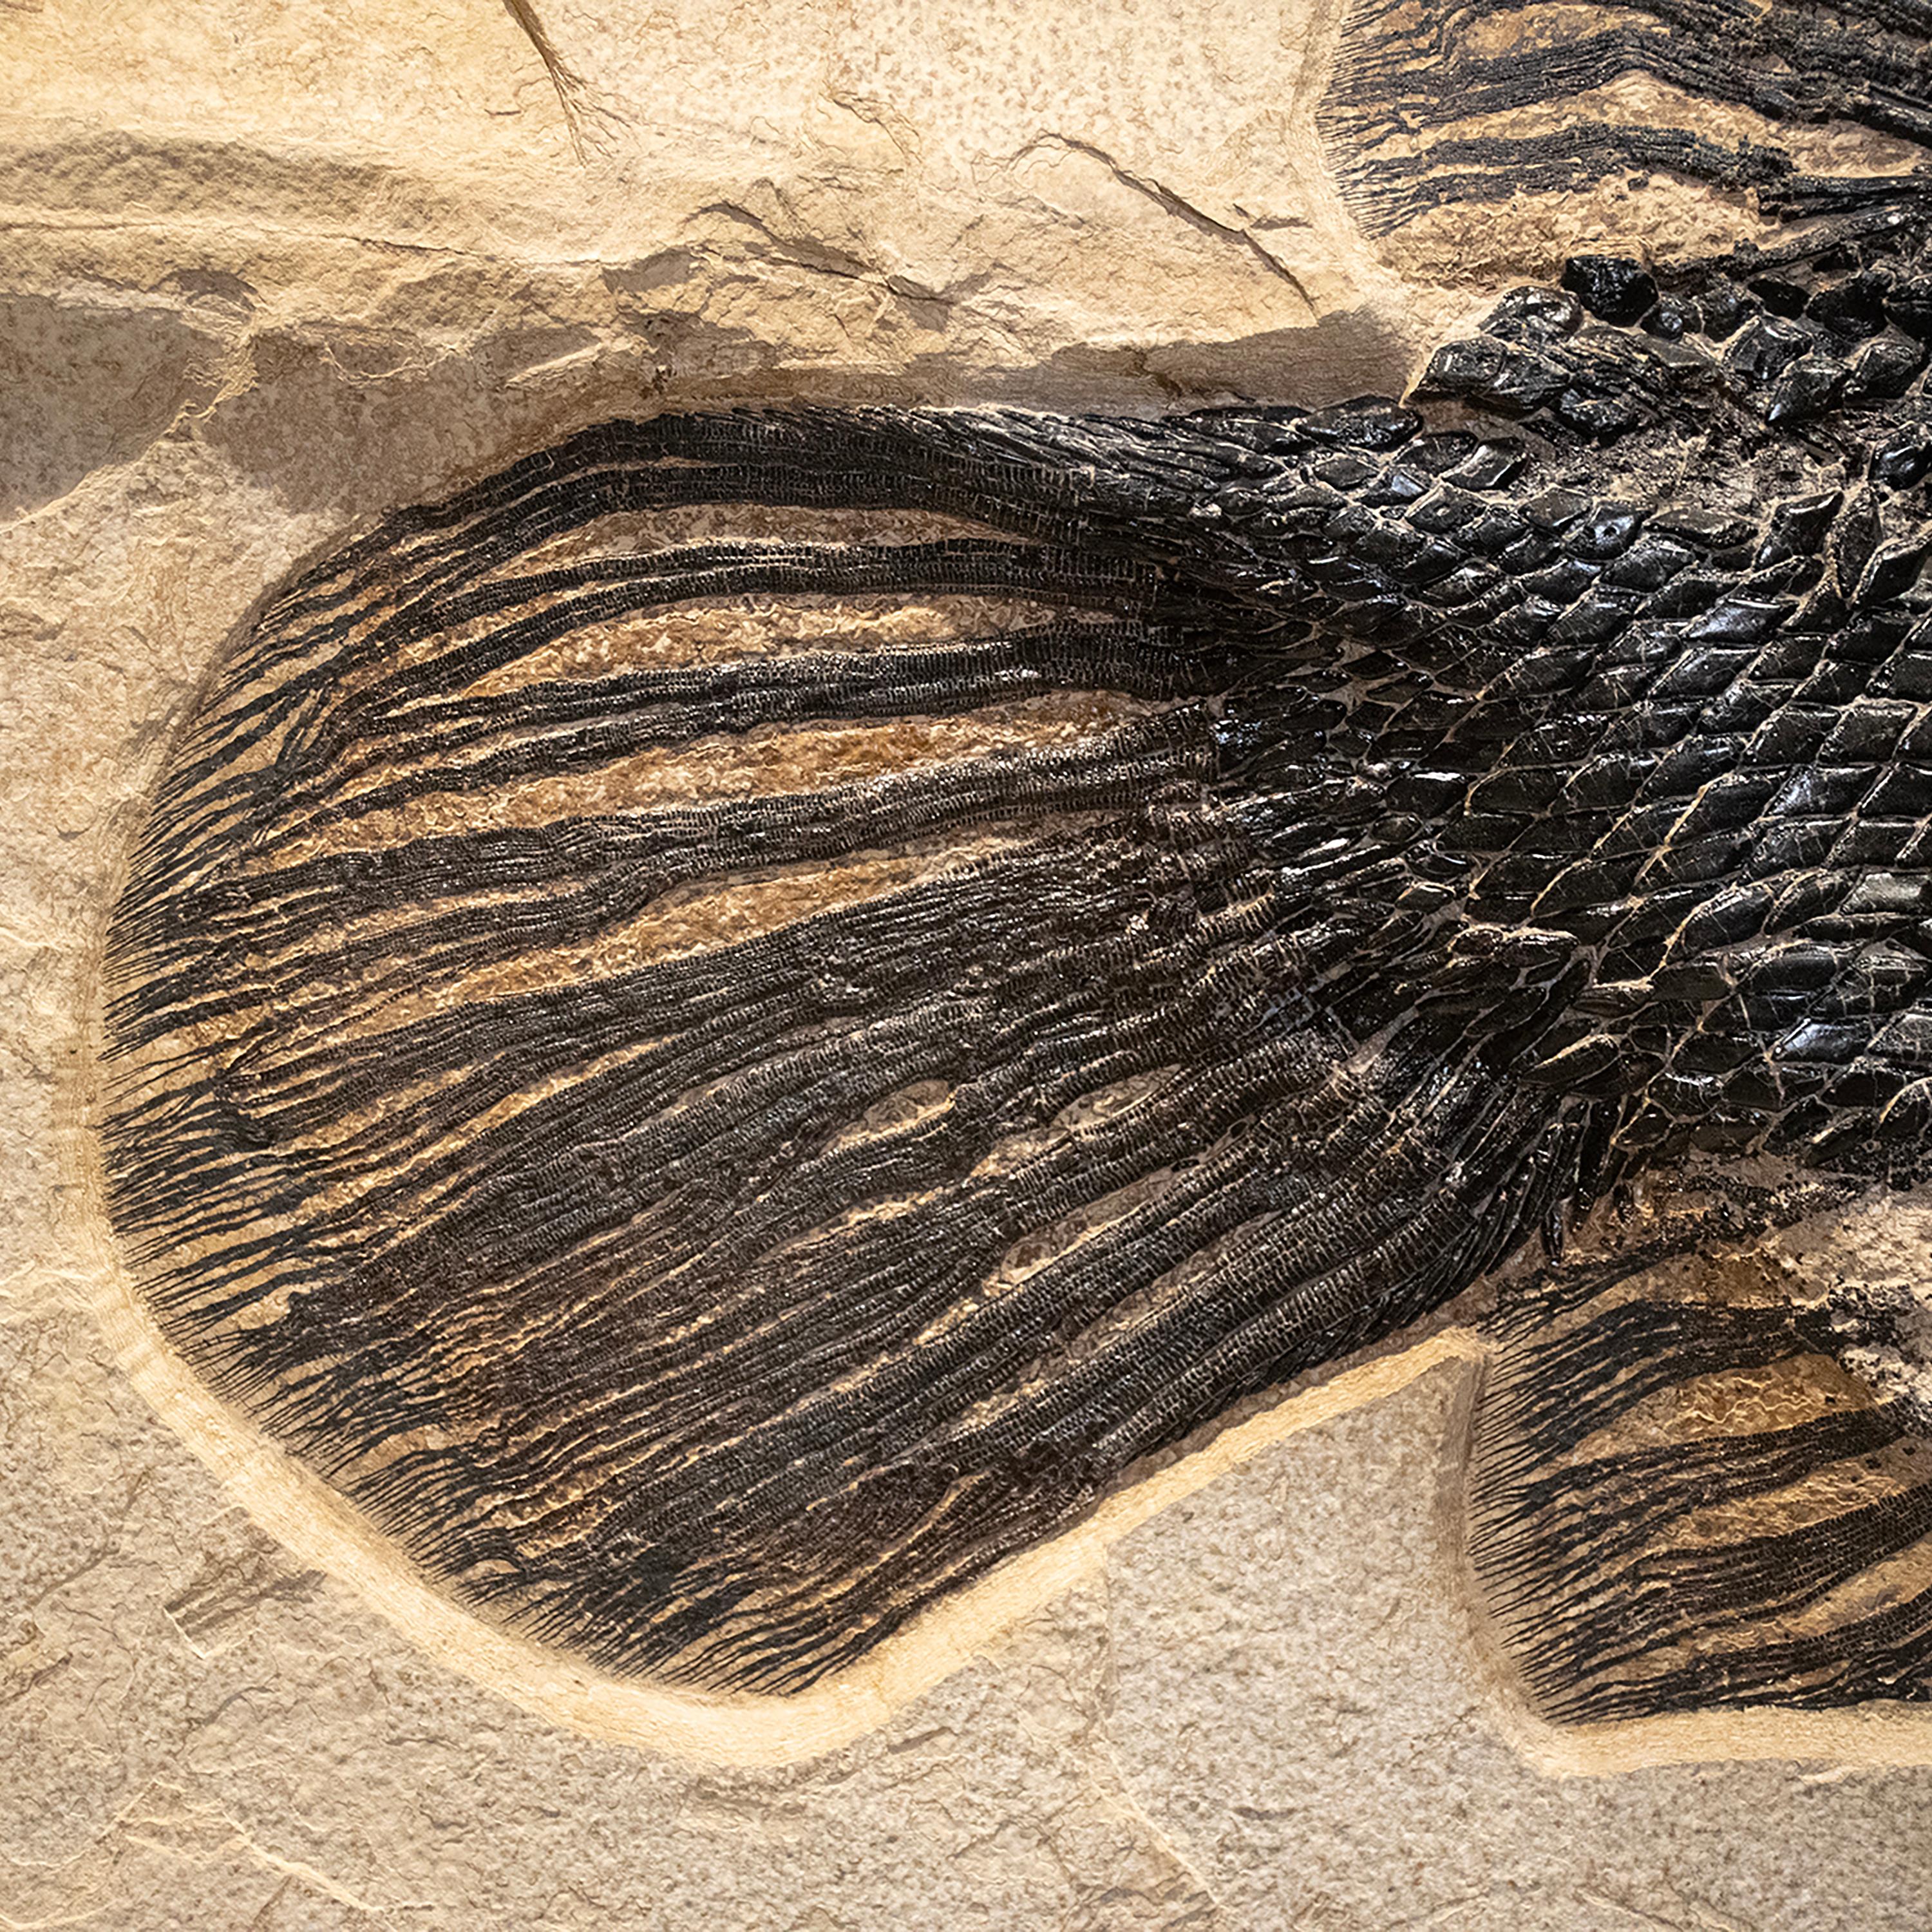 fossil formation